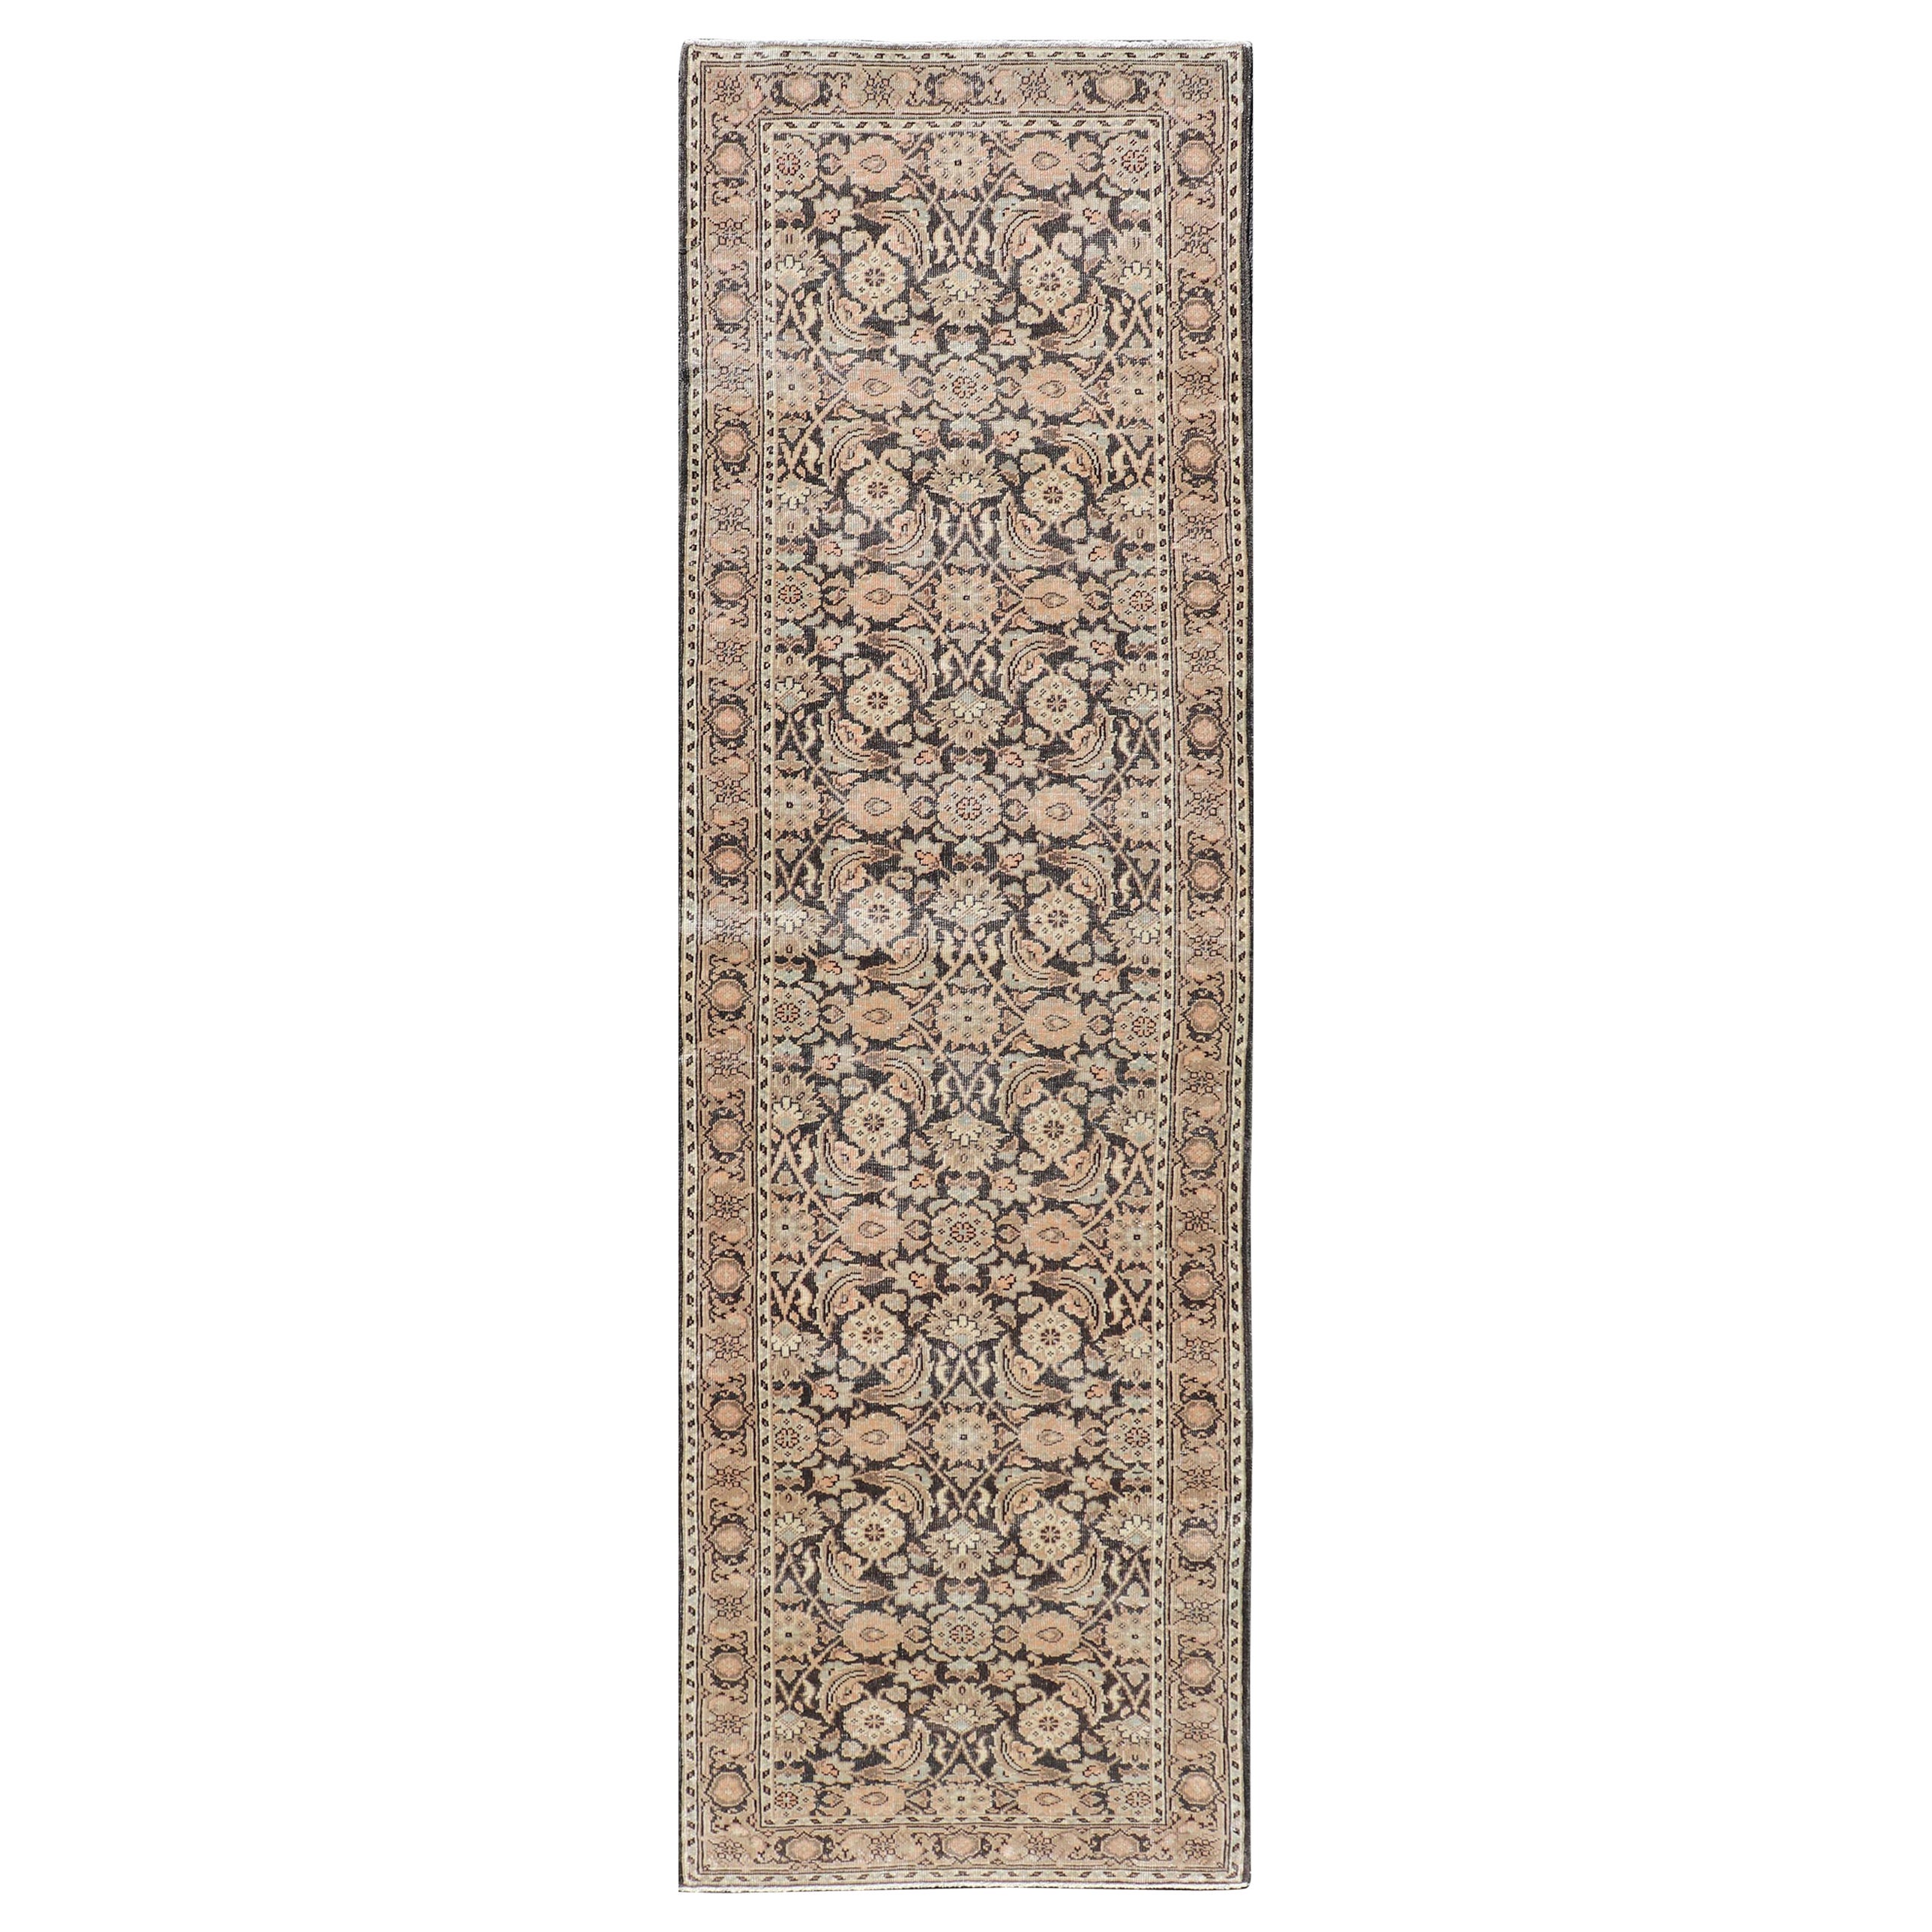 Antique Persian Tabriz Runner with Ornate Floral Design in Earthy Tones  For Sale